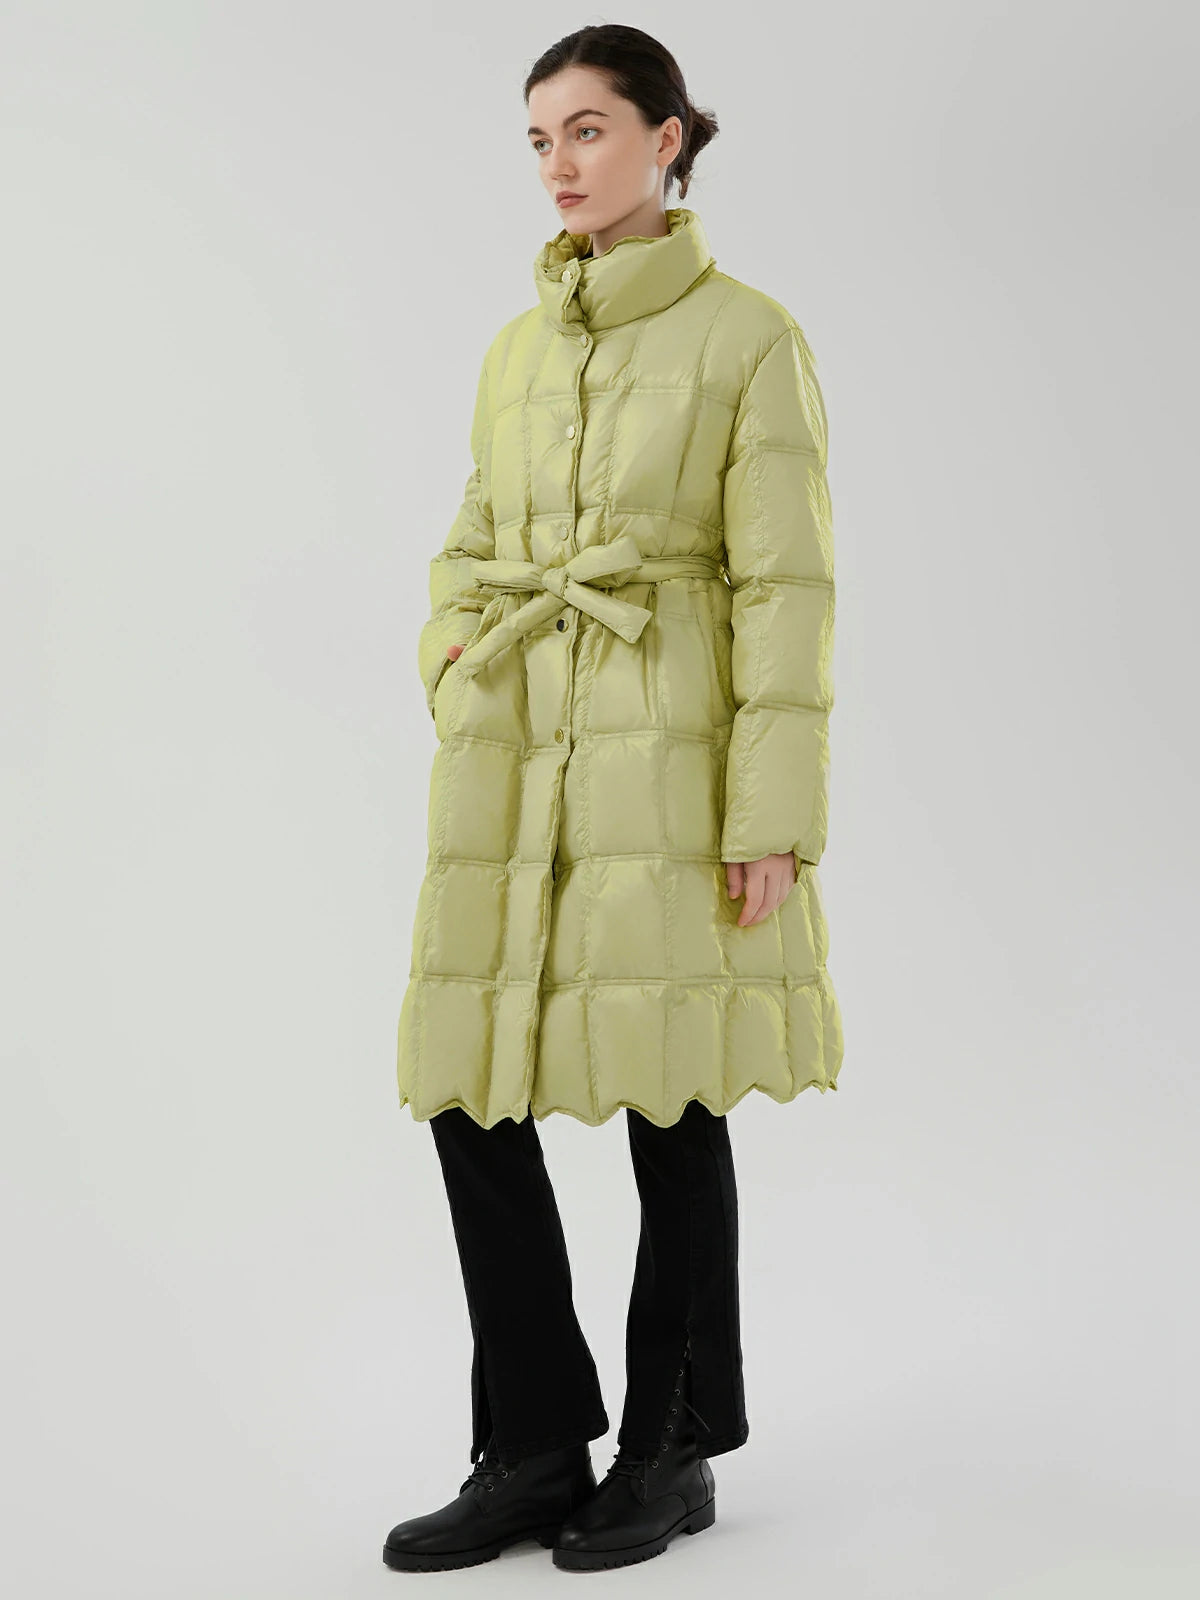 Exceptional fit and warmth in a lightweight winter coat